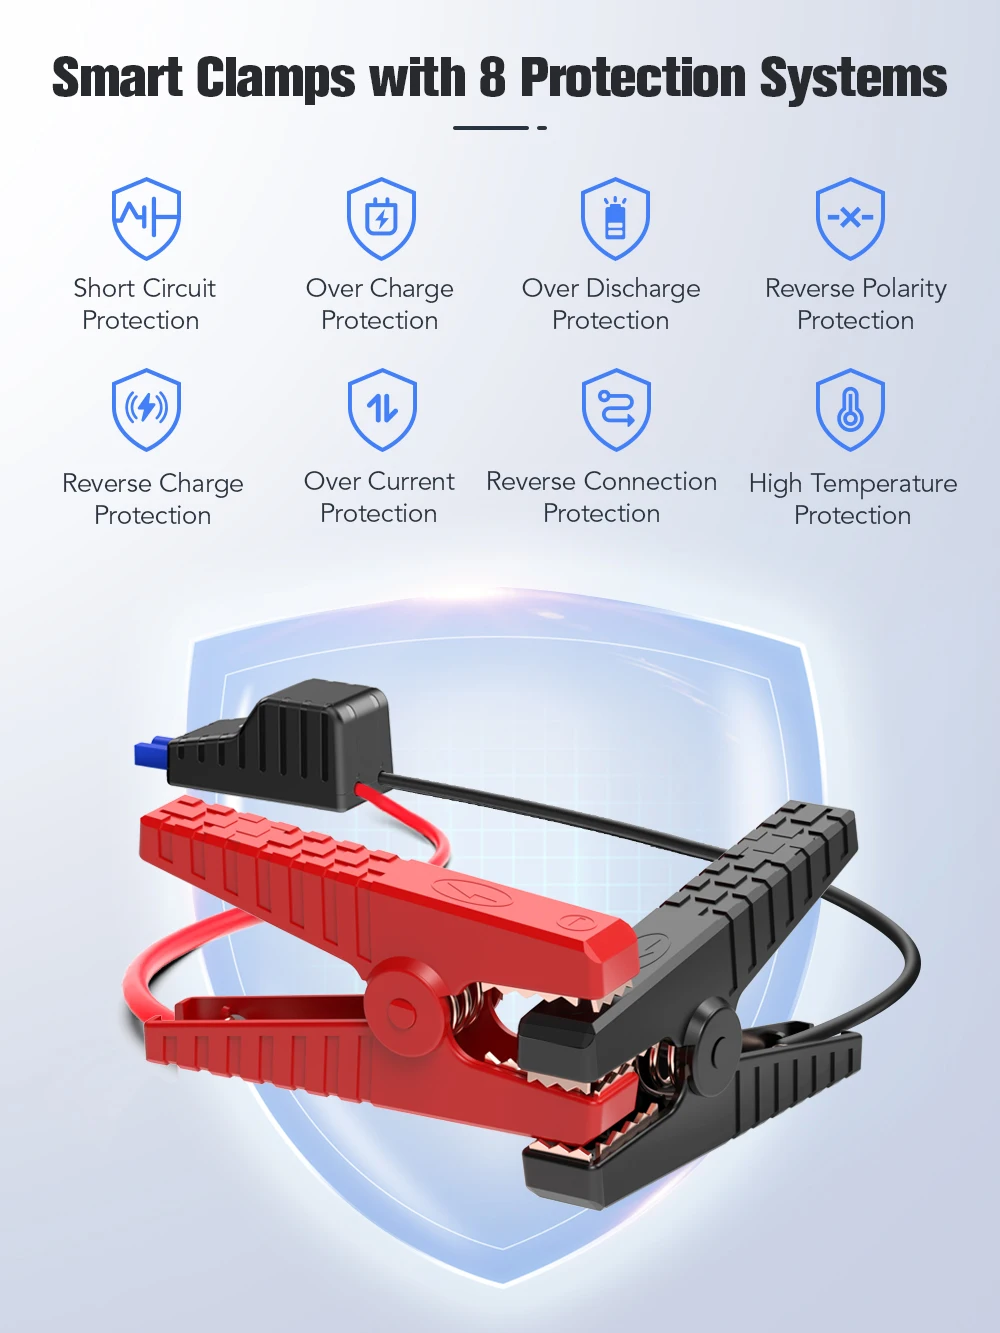 portable car jump starter Yaber Power Bank 23800mAh 2500A Jump Starter 12V Portable Power Station Emergency Battery Charger for Cars Auto Booster Starters noco boost plus gb40